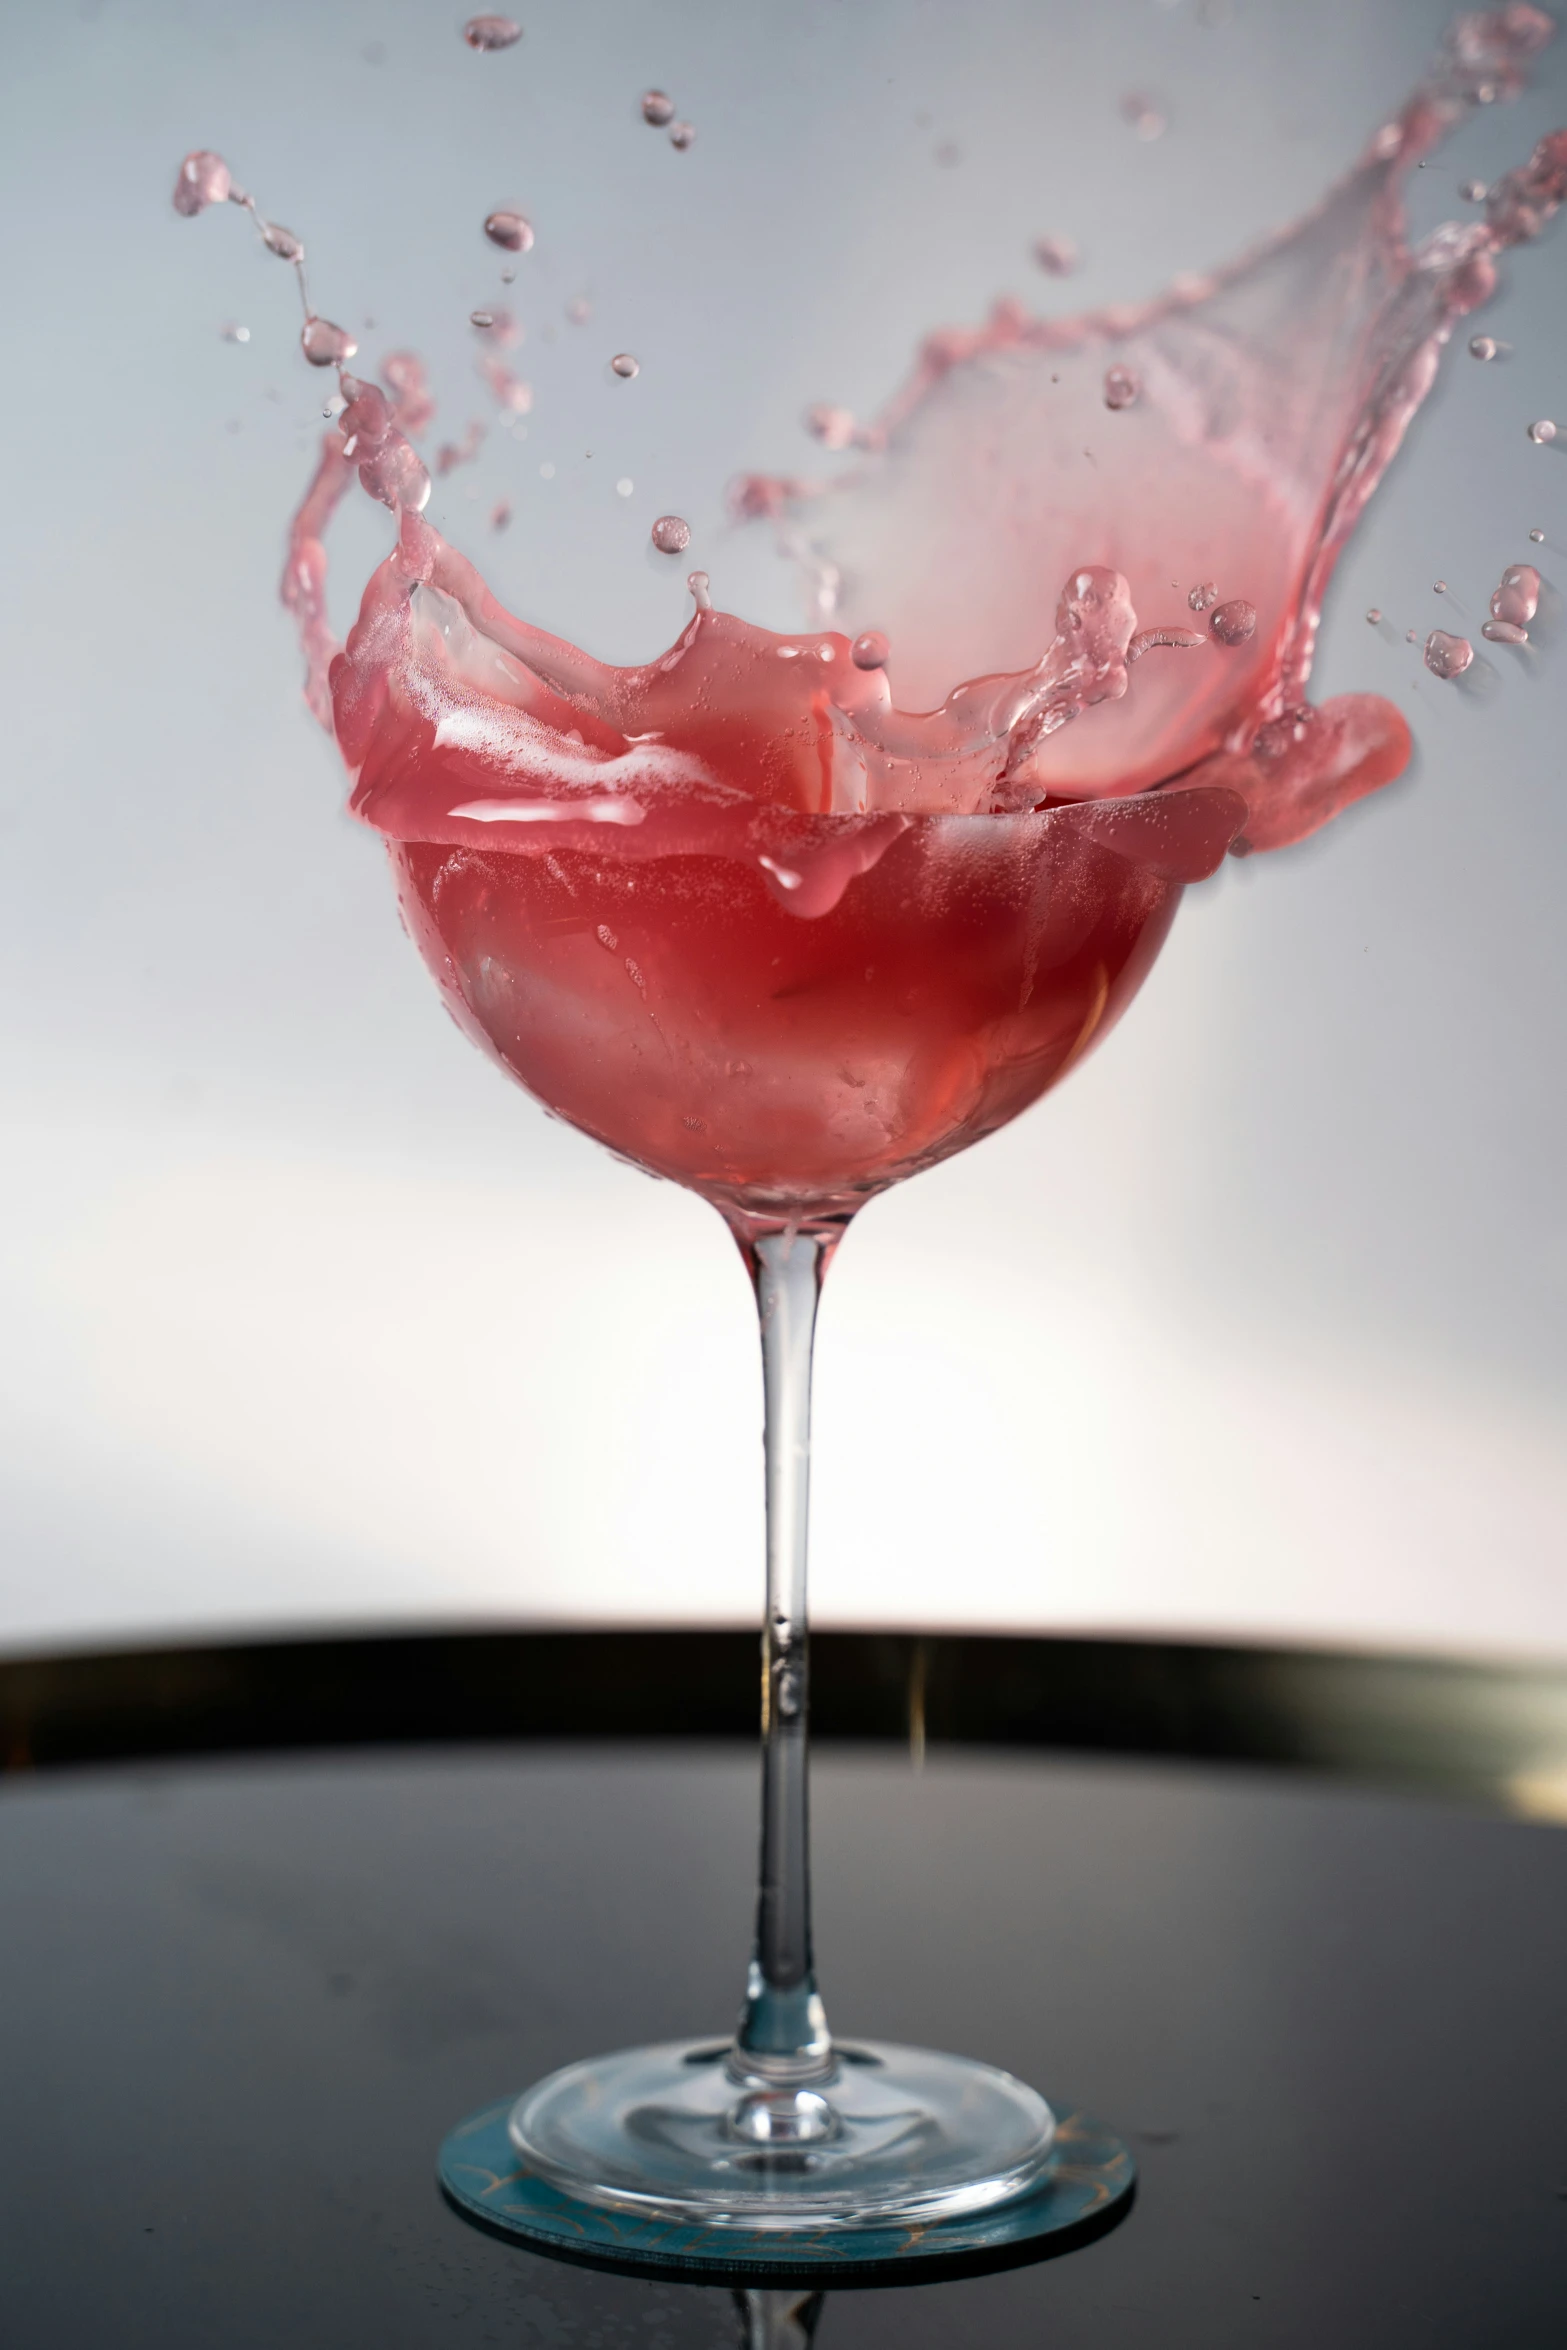 a pink liquid splashing into the cup